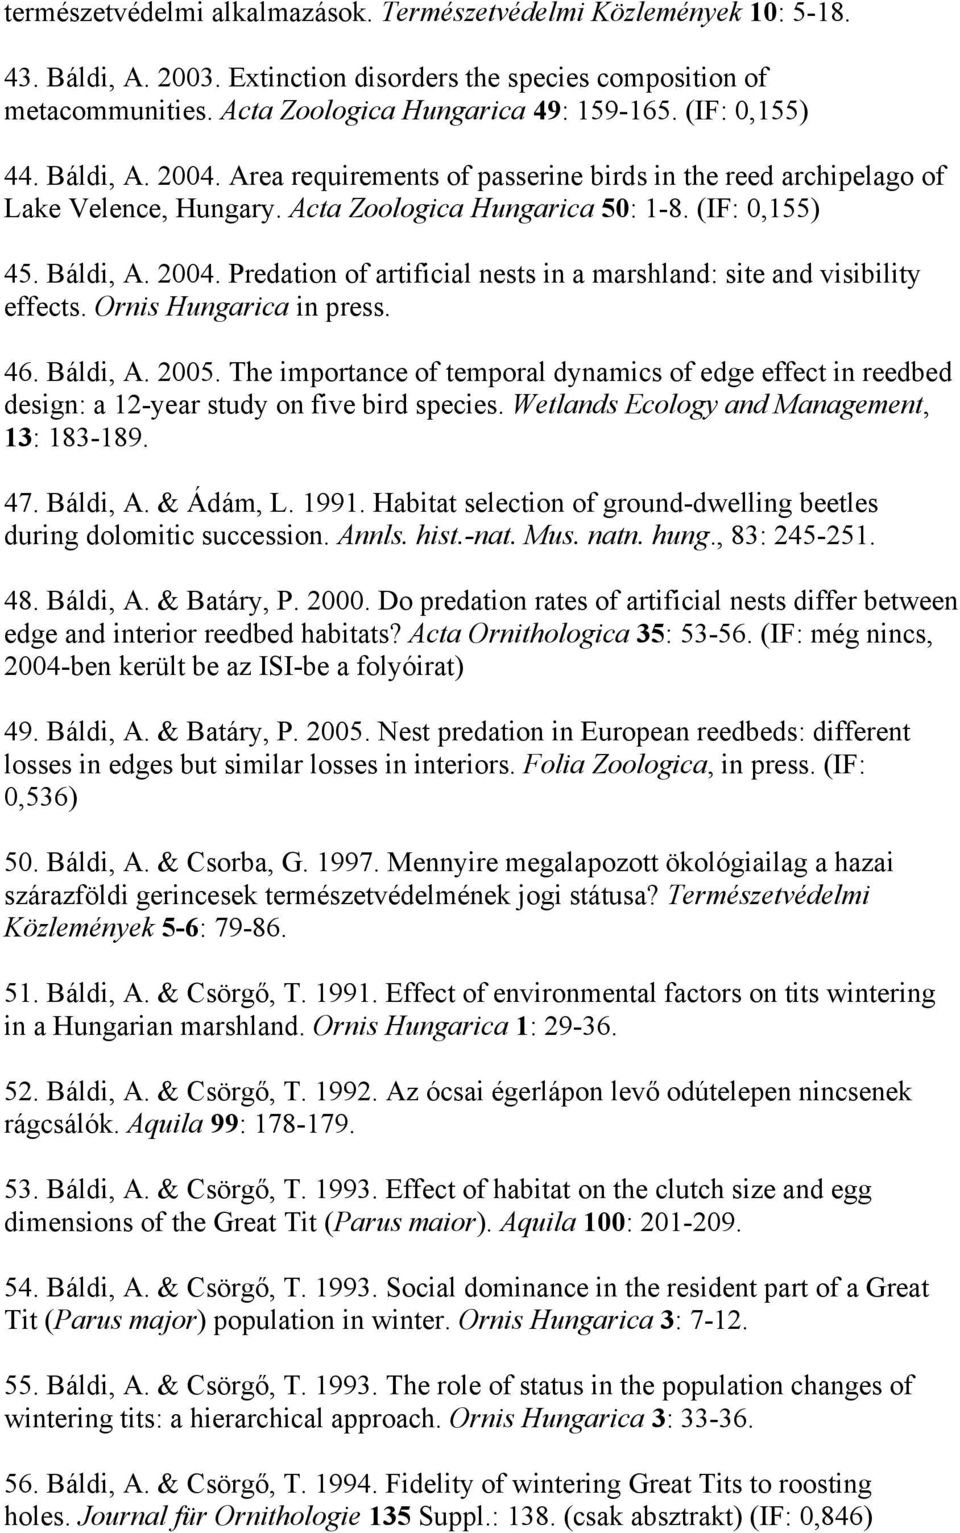 Ornis Hungarica in press. 46. Báldi, A. 2005. The importance of temporal dynamics of edge effect in reedbed design: a 12-year study on five bird species. Wetlands Ecology and Management, 13: 183-189.